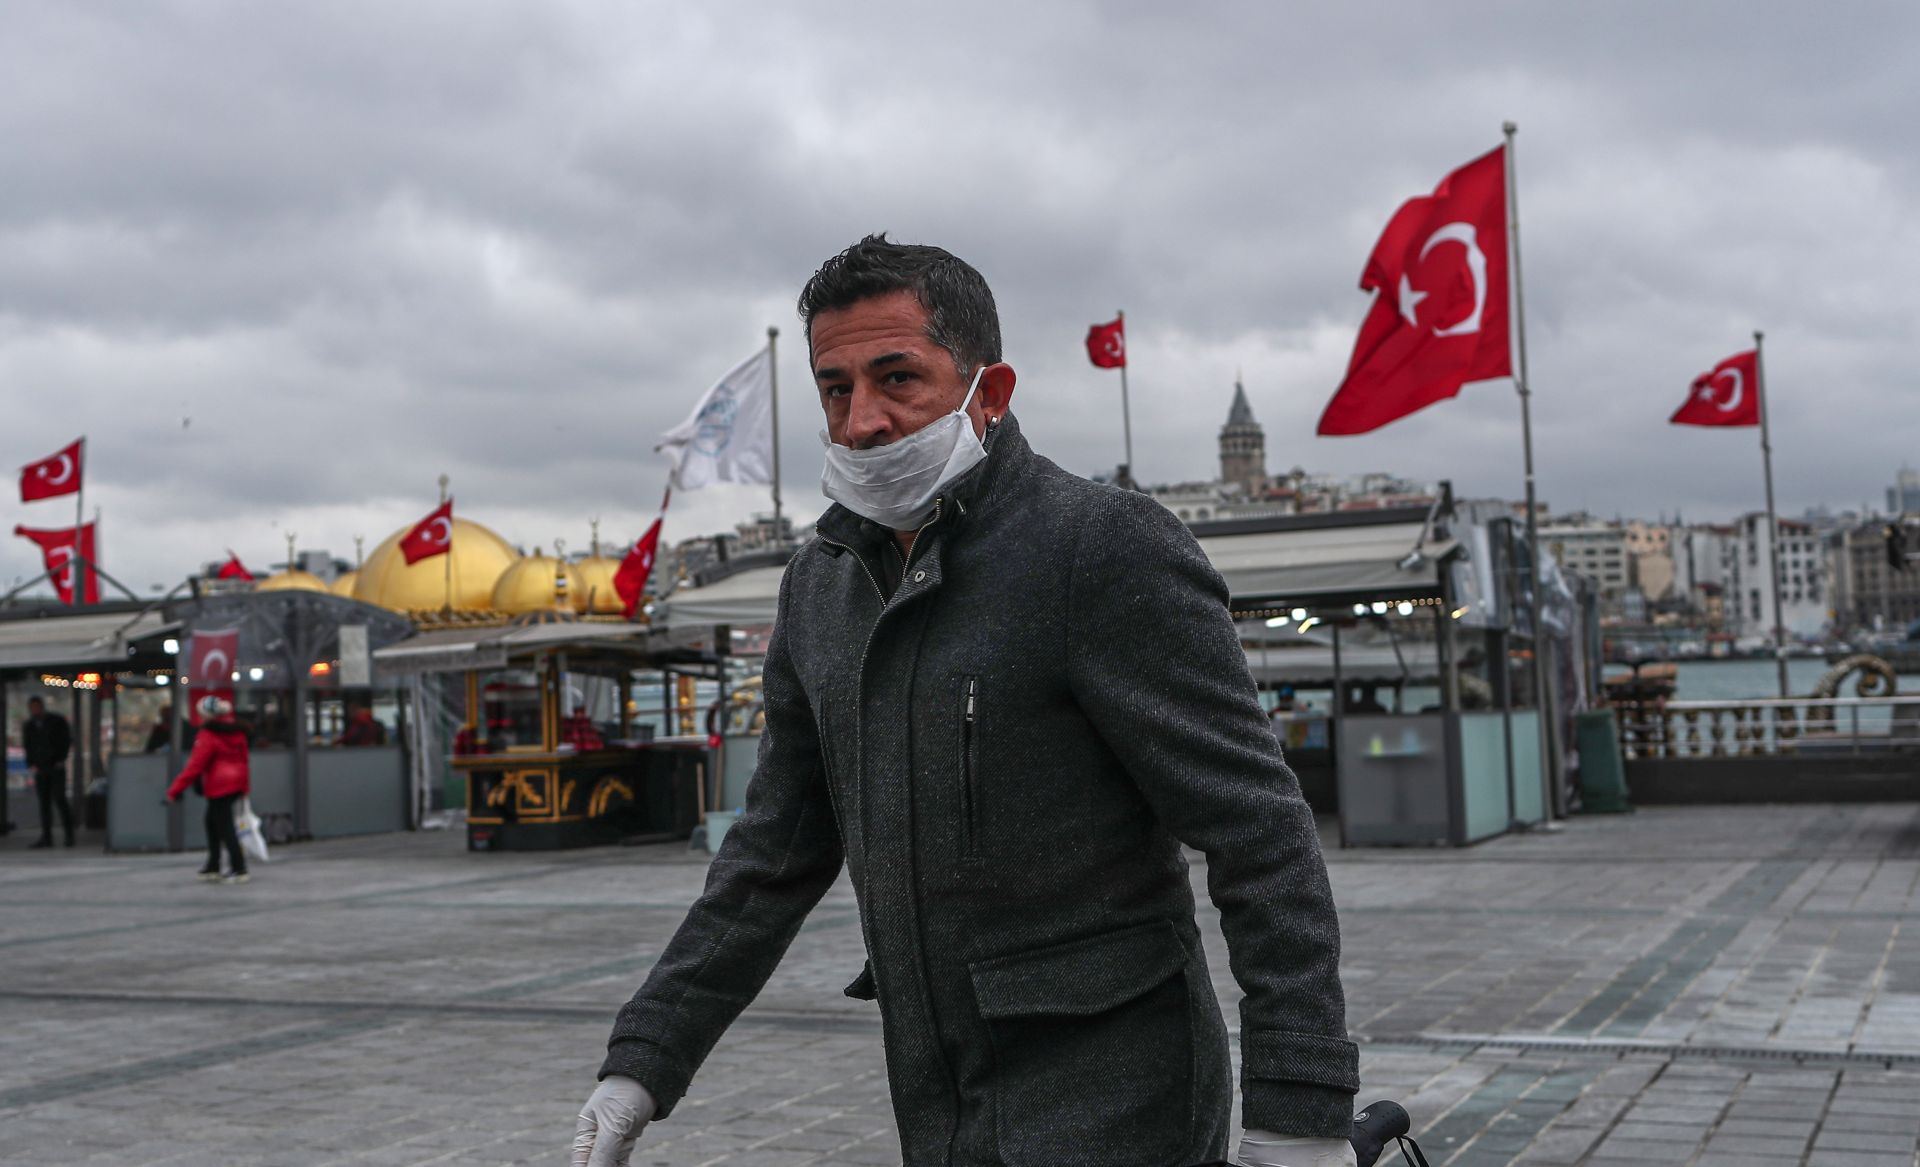 epa08321968 A man with a face mask and gloves walks in empty streets in Istanbul, Turkey, 25 March 2020. Turkish Health Minister Koca said on 24 March that there are 1,872 confirmed cases of the coronavirus and 44  related deaths from COVID-19. Turkey decided to halt public events, temporarily shut down schools and suspend sporting events in an attempt to prevent further spreading of the coronavirus.  EPA/SEDAT SUNA